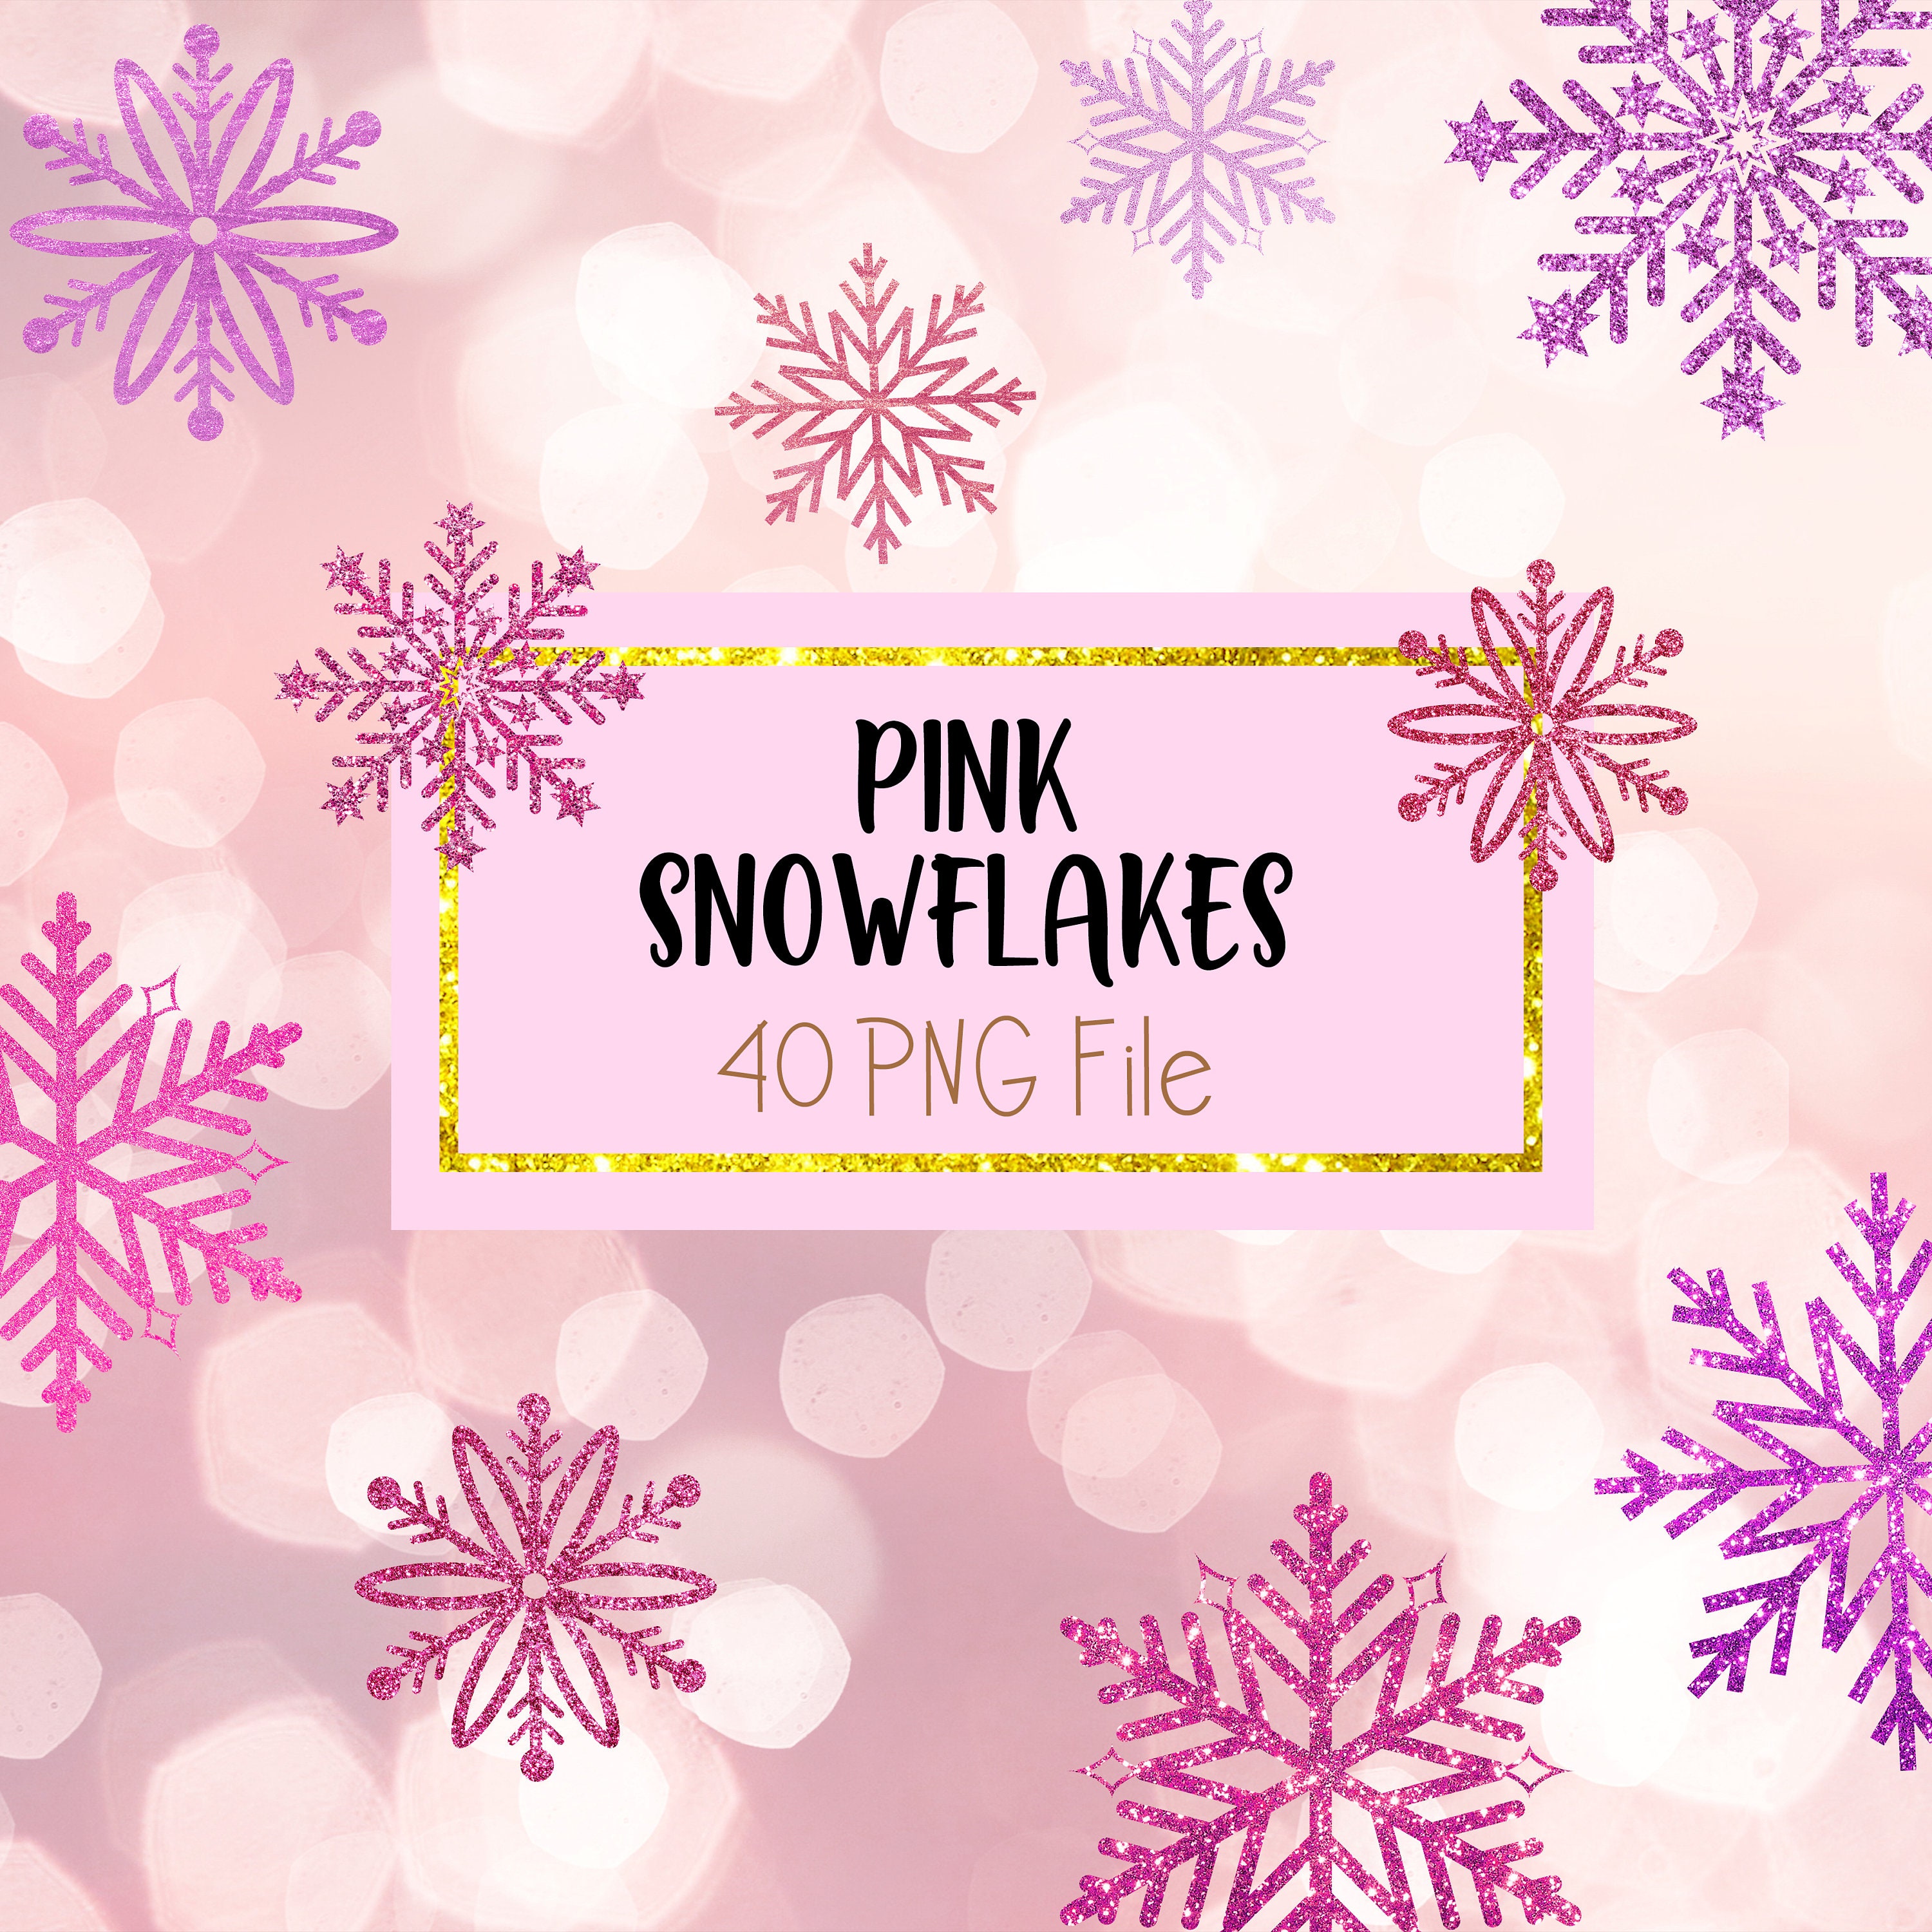 Silver Snowflake PNG, Glitter Snowflakes PNG, Snowflake Clipart, Frozen  Snowflake Overlay, Winter Clipart 